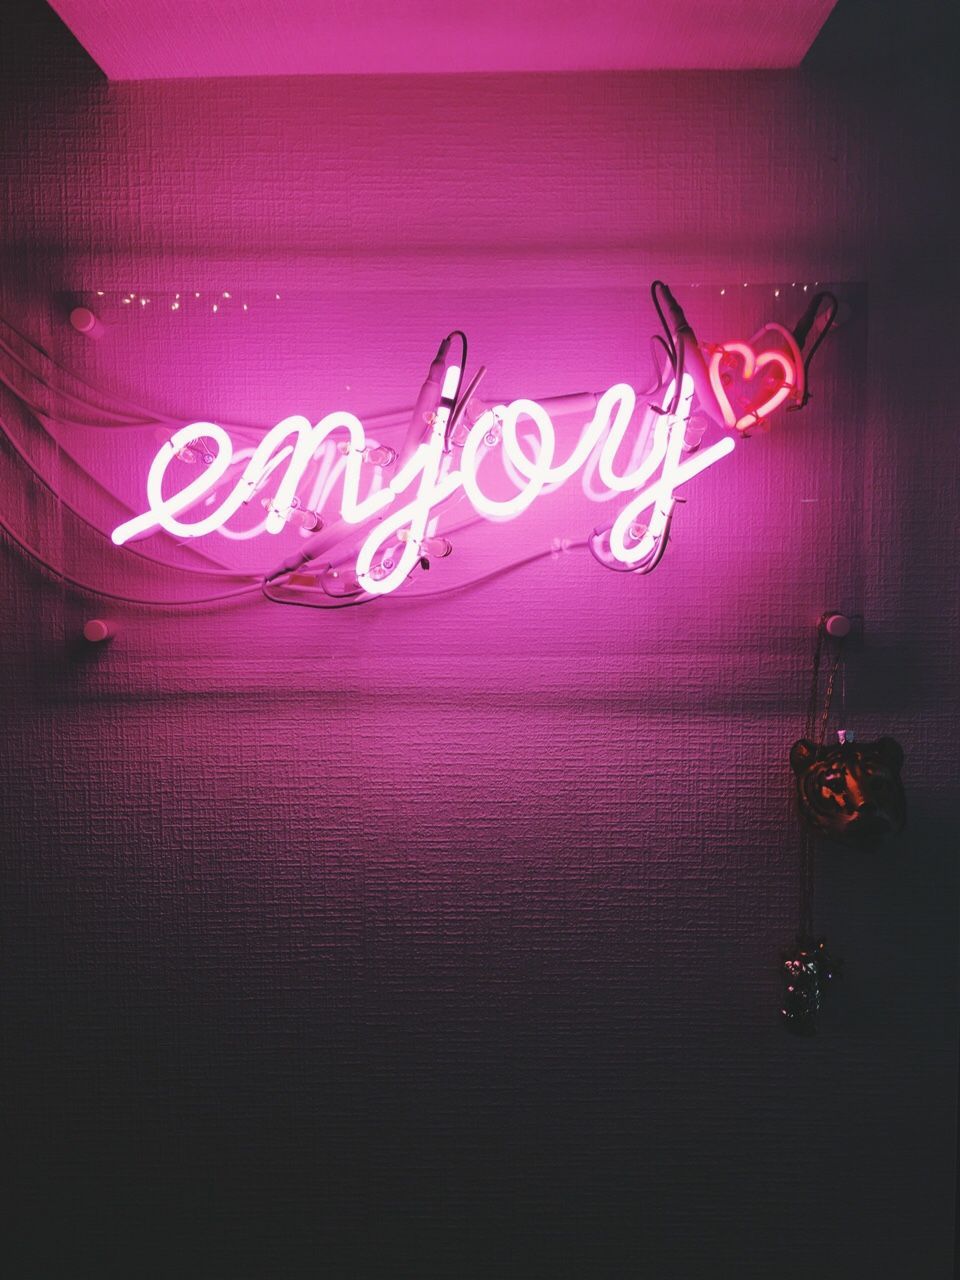 W O R D S. Neon signs, Neon quotes, Neon words